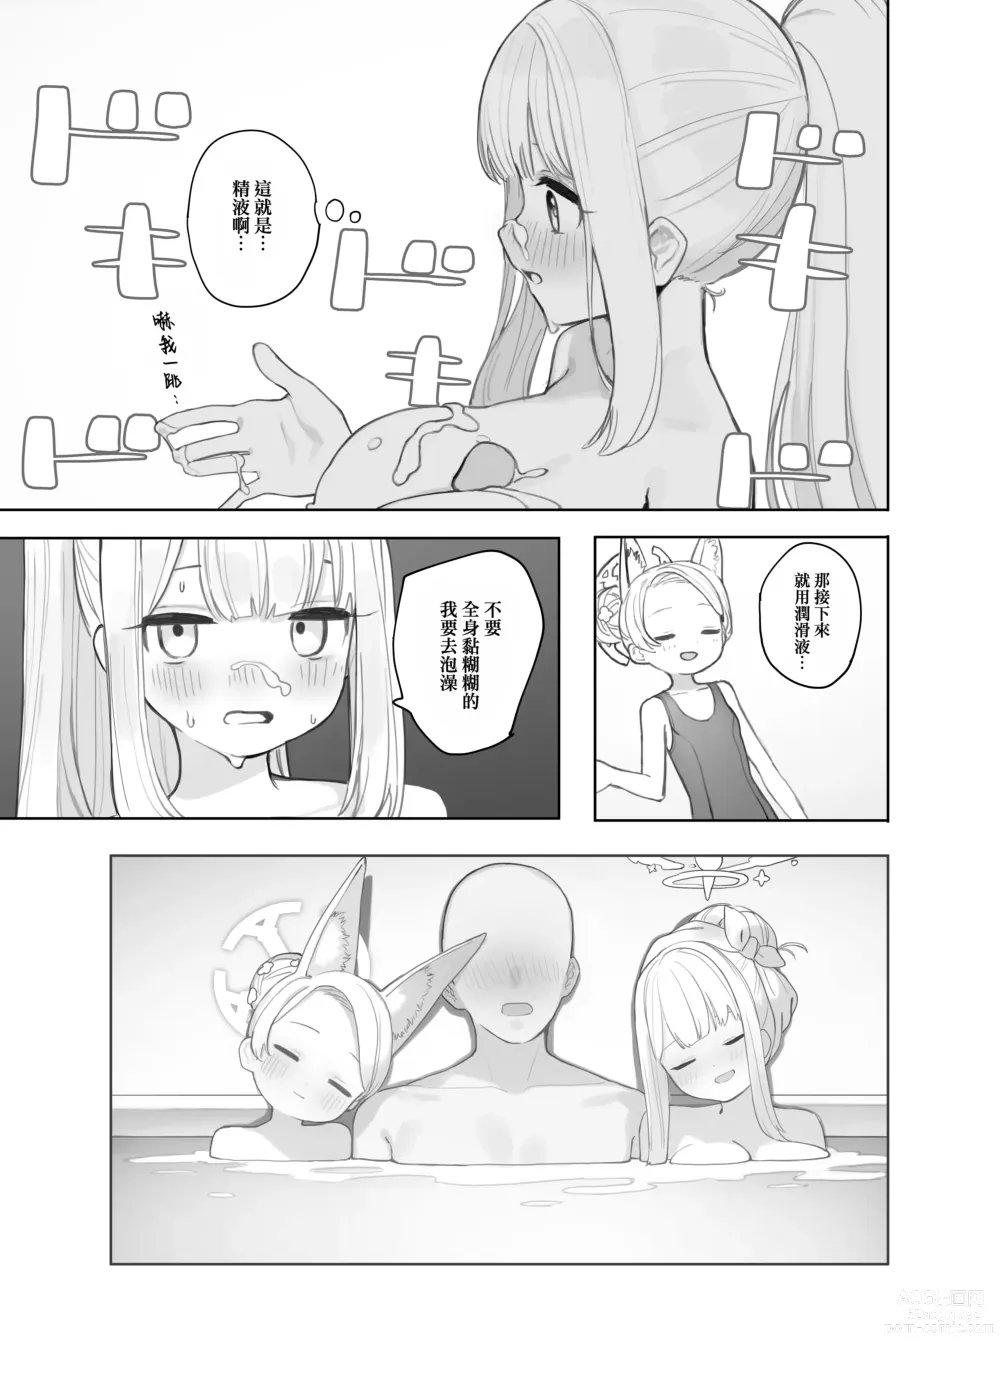 Page 14 of doujinshi 伊甸條約的善後處理 (decensored)